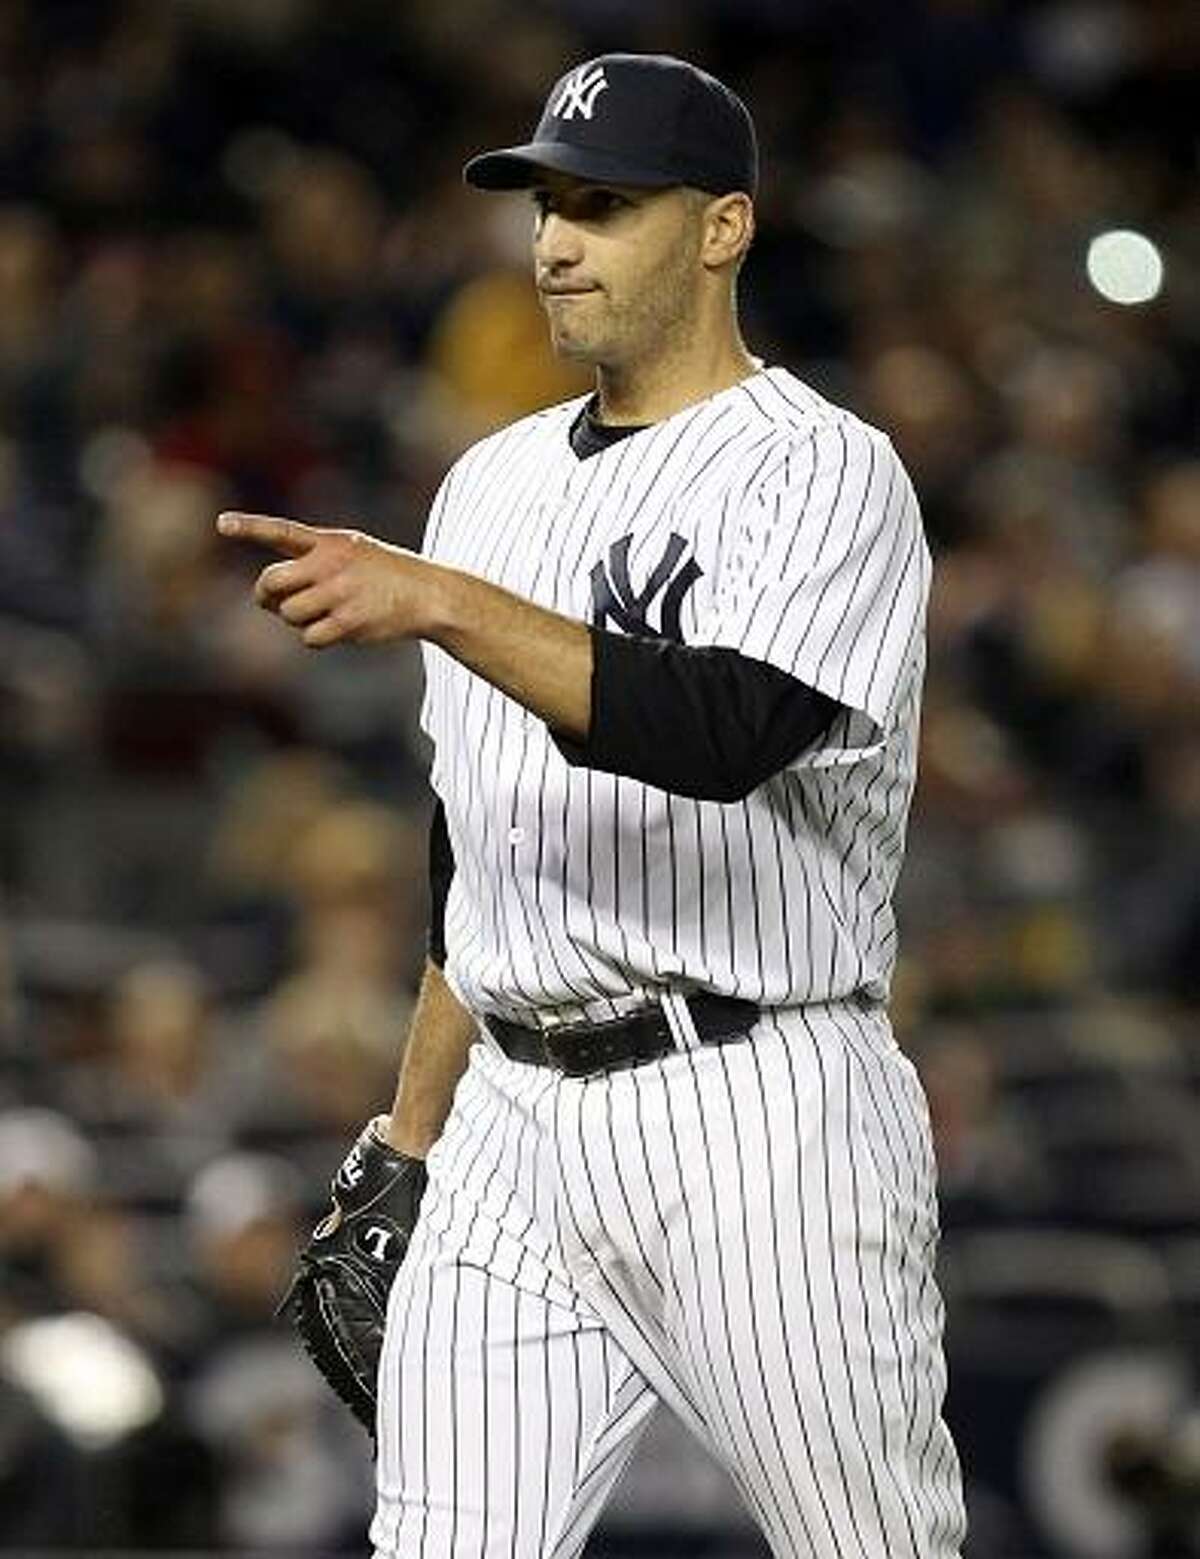 New York Yankees starting pitcher Andy Pettitte reacts after finishing the top of the sixth inning of a baseball game against the Tampa Bay Rays at Yankee Stadium in New York, Tuesday, June 5, 2012. (AP Photo/Seth Wenig)